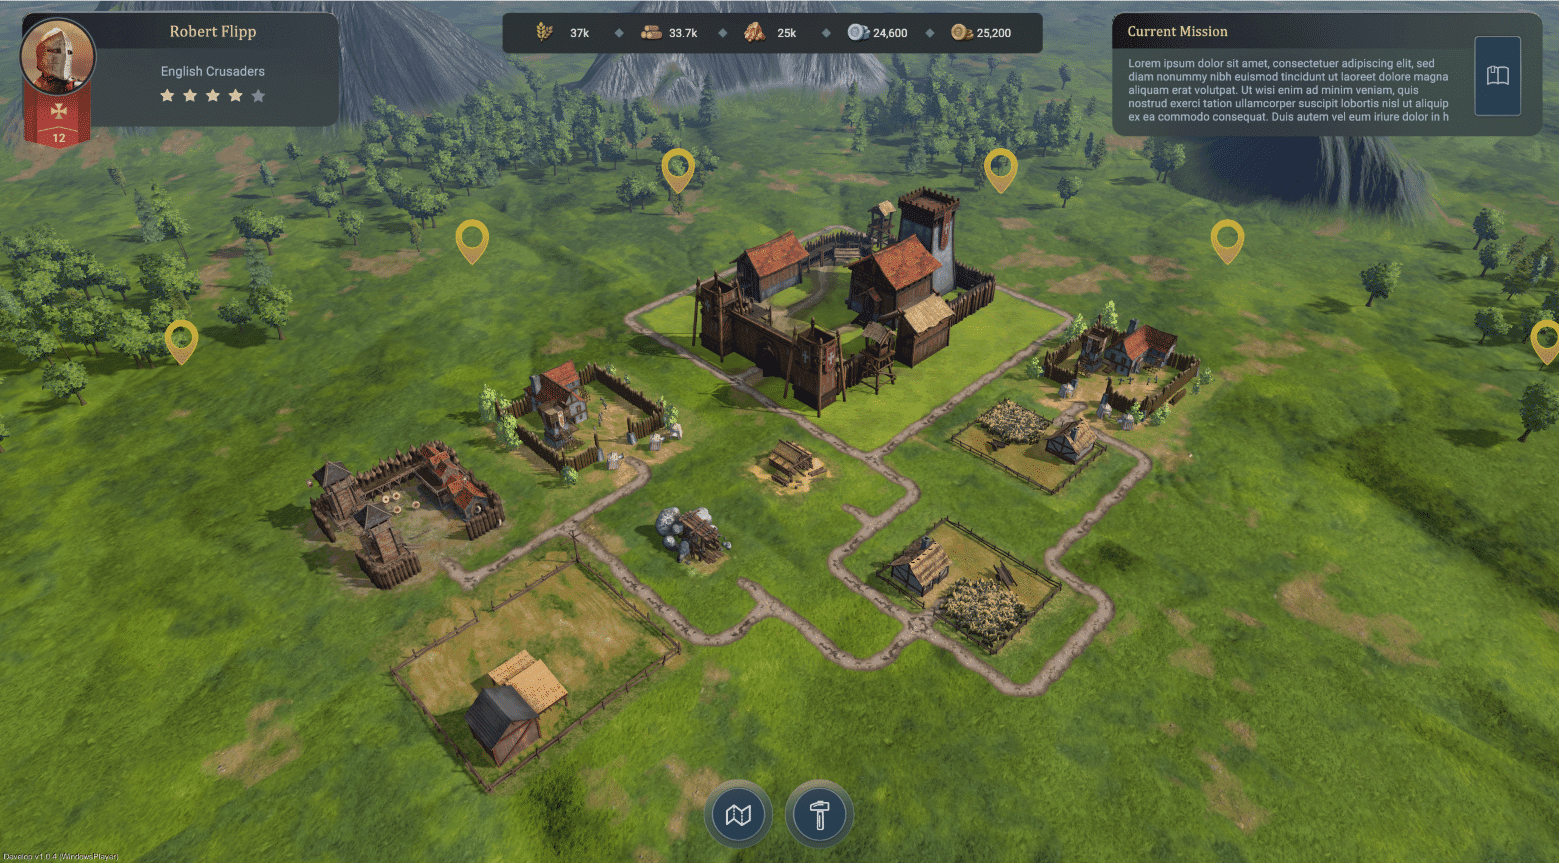 The Medieval Empires: Ertugrul is a story-based NFT play-to-earn game in which you take control of forces of a Turkish king and try to build an empire